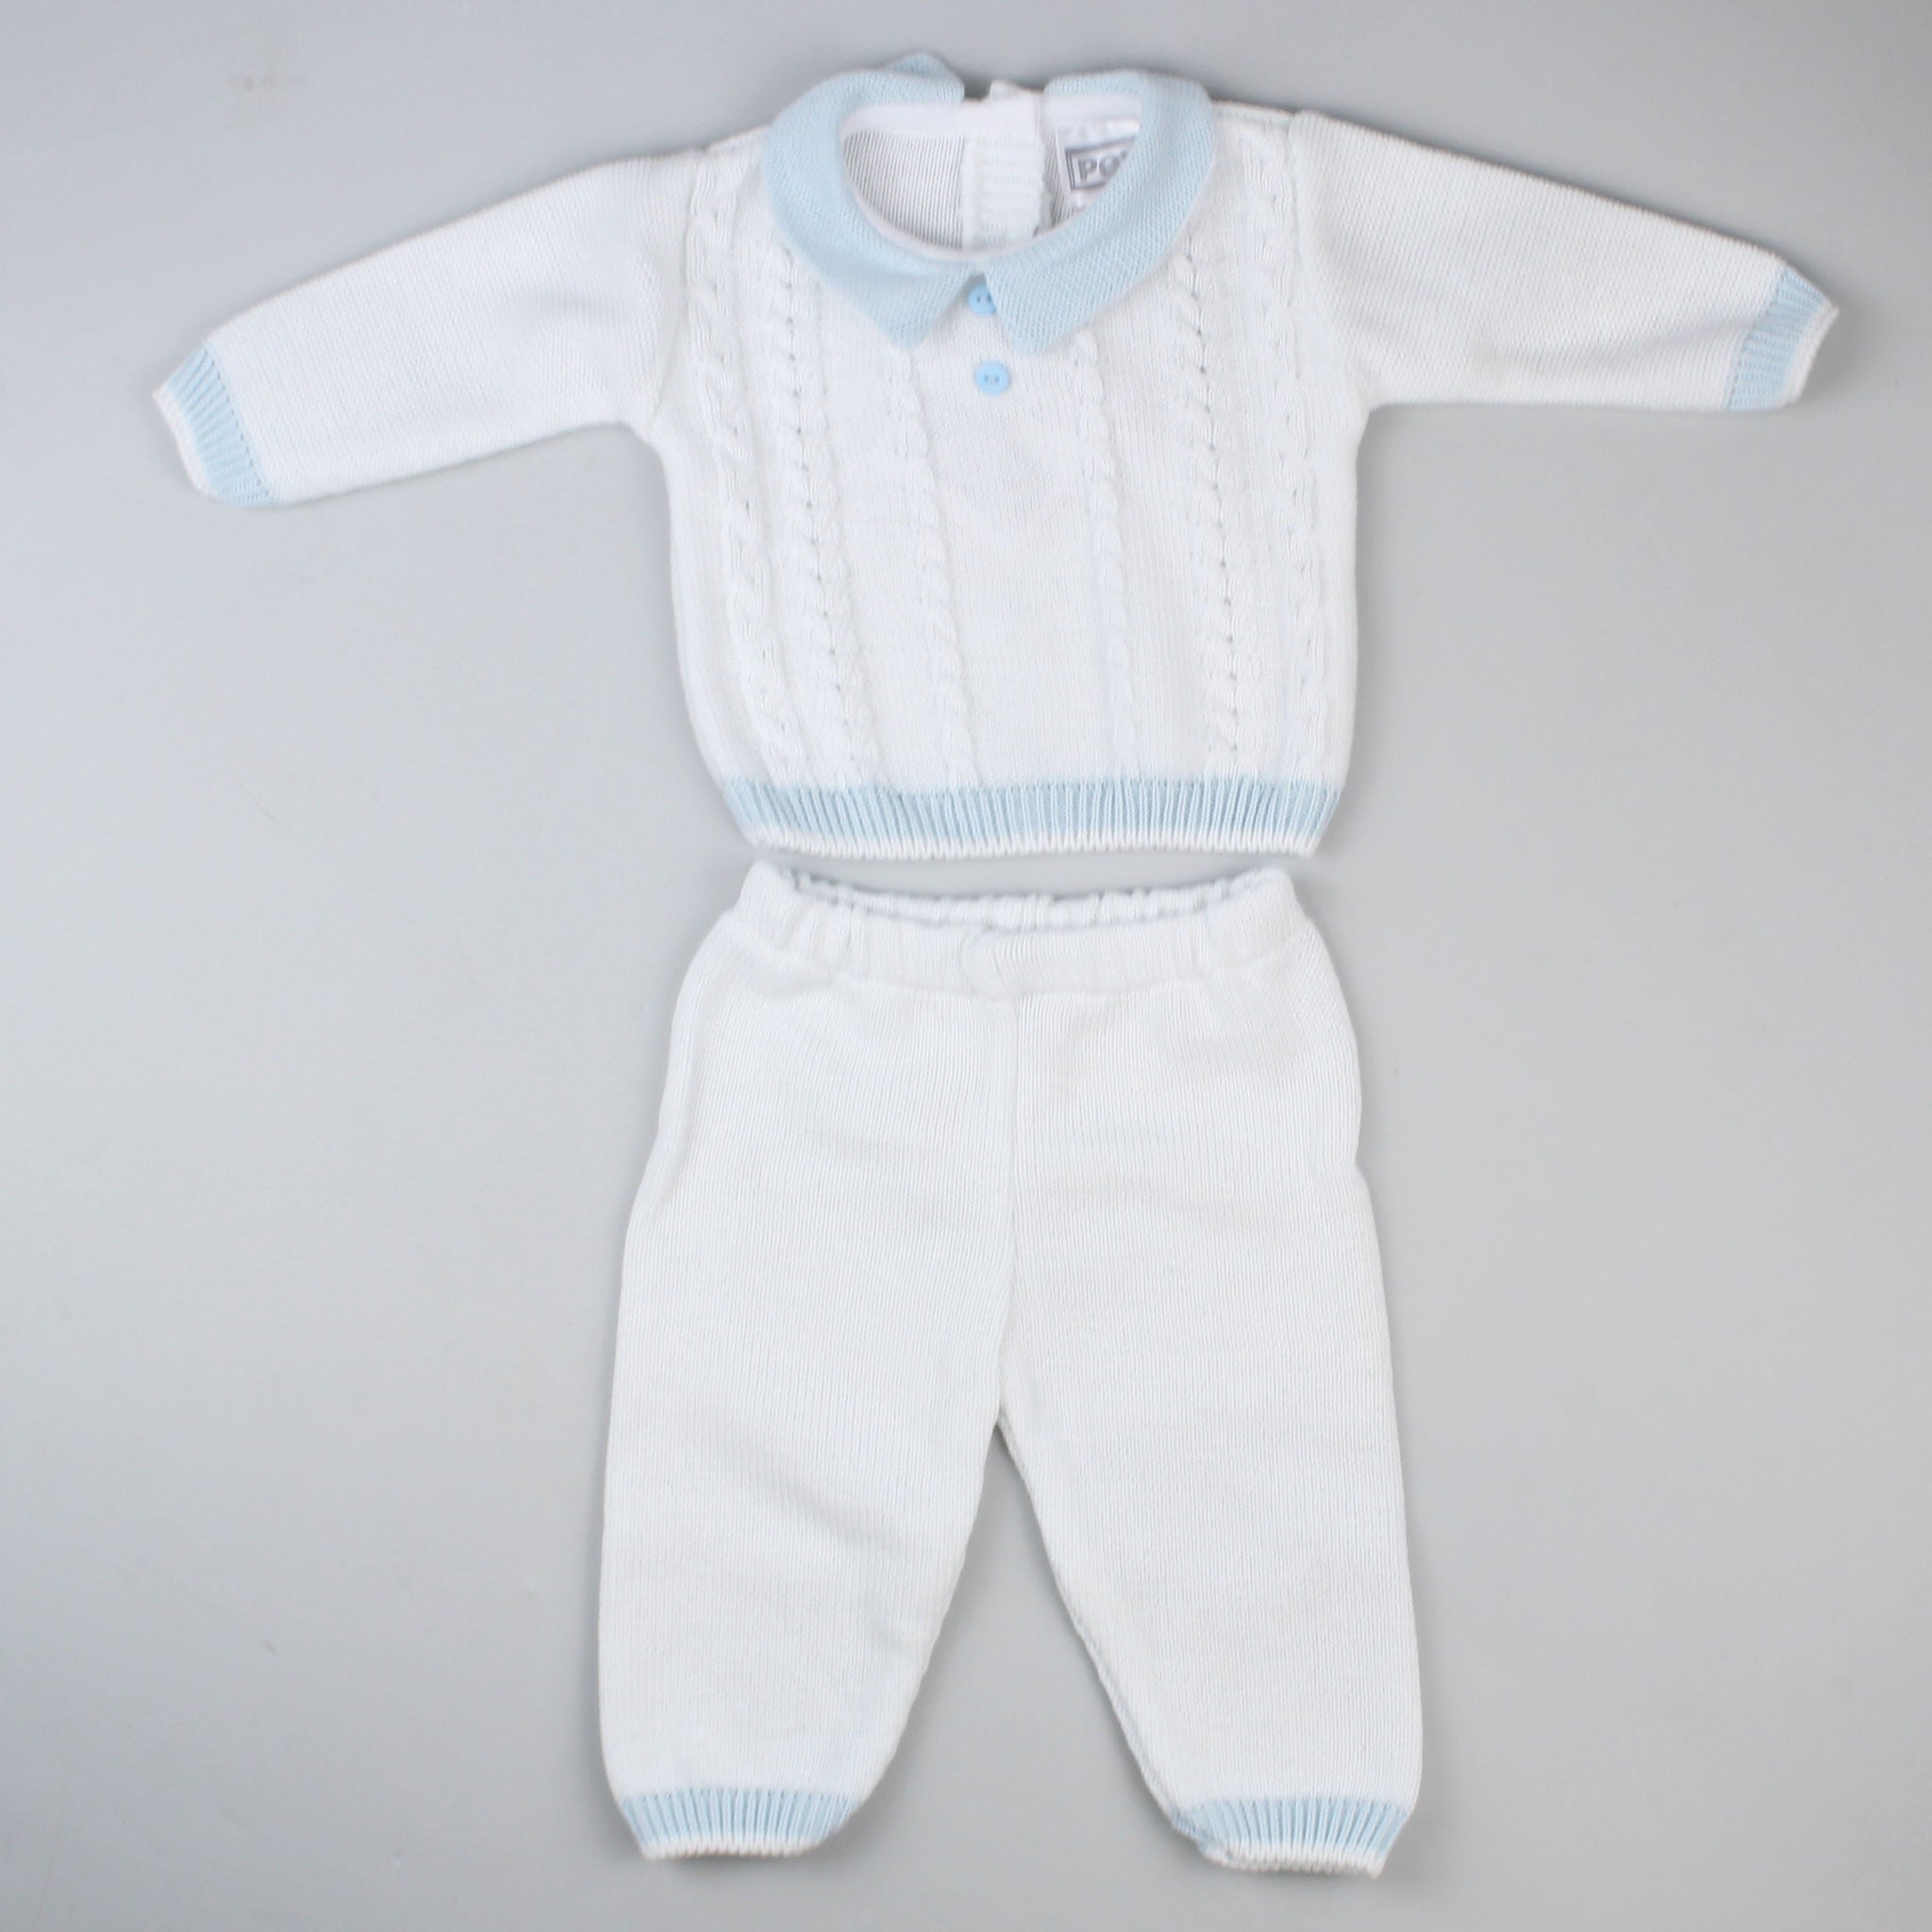 baby boys white and blue knitted outfit with shirt and pants